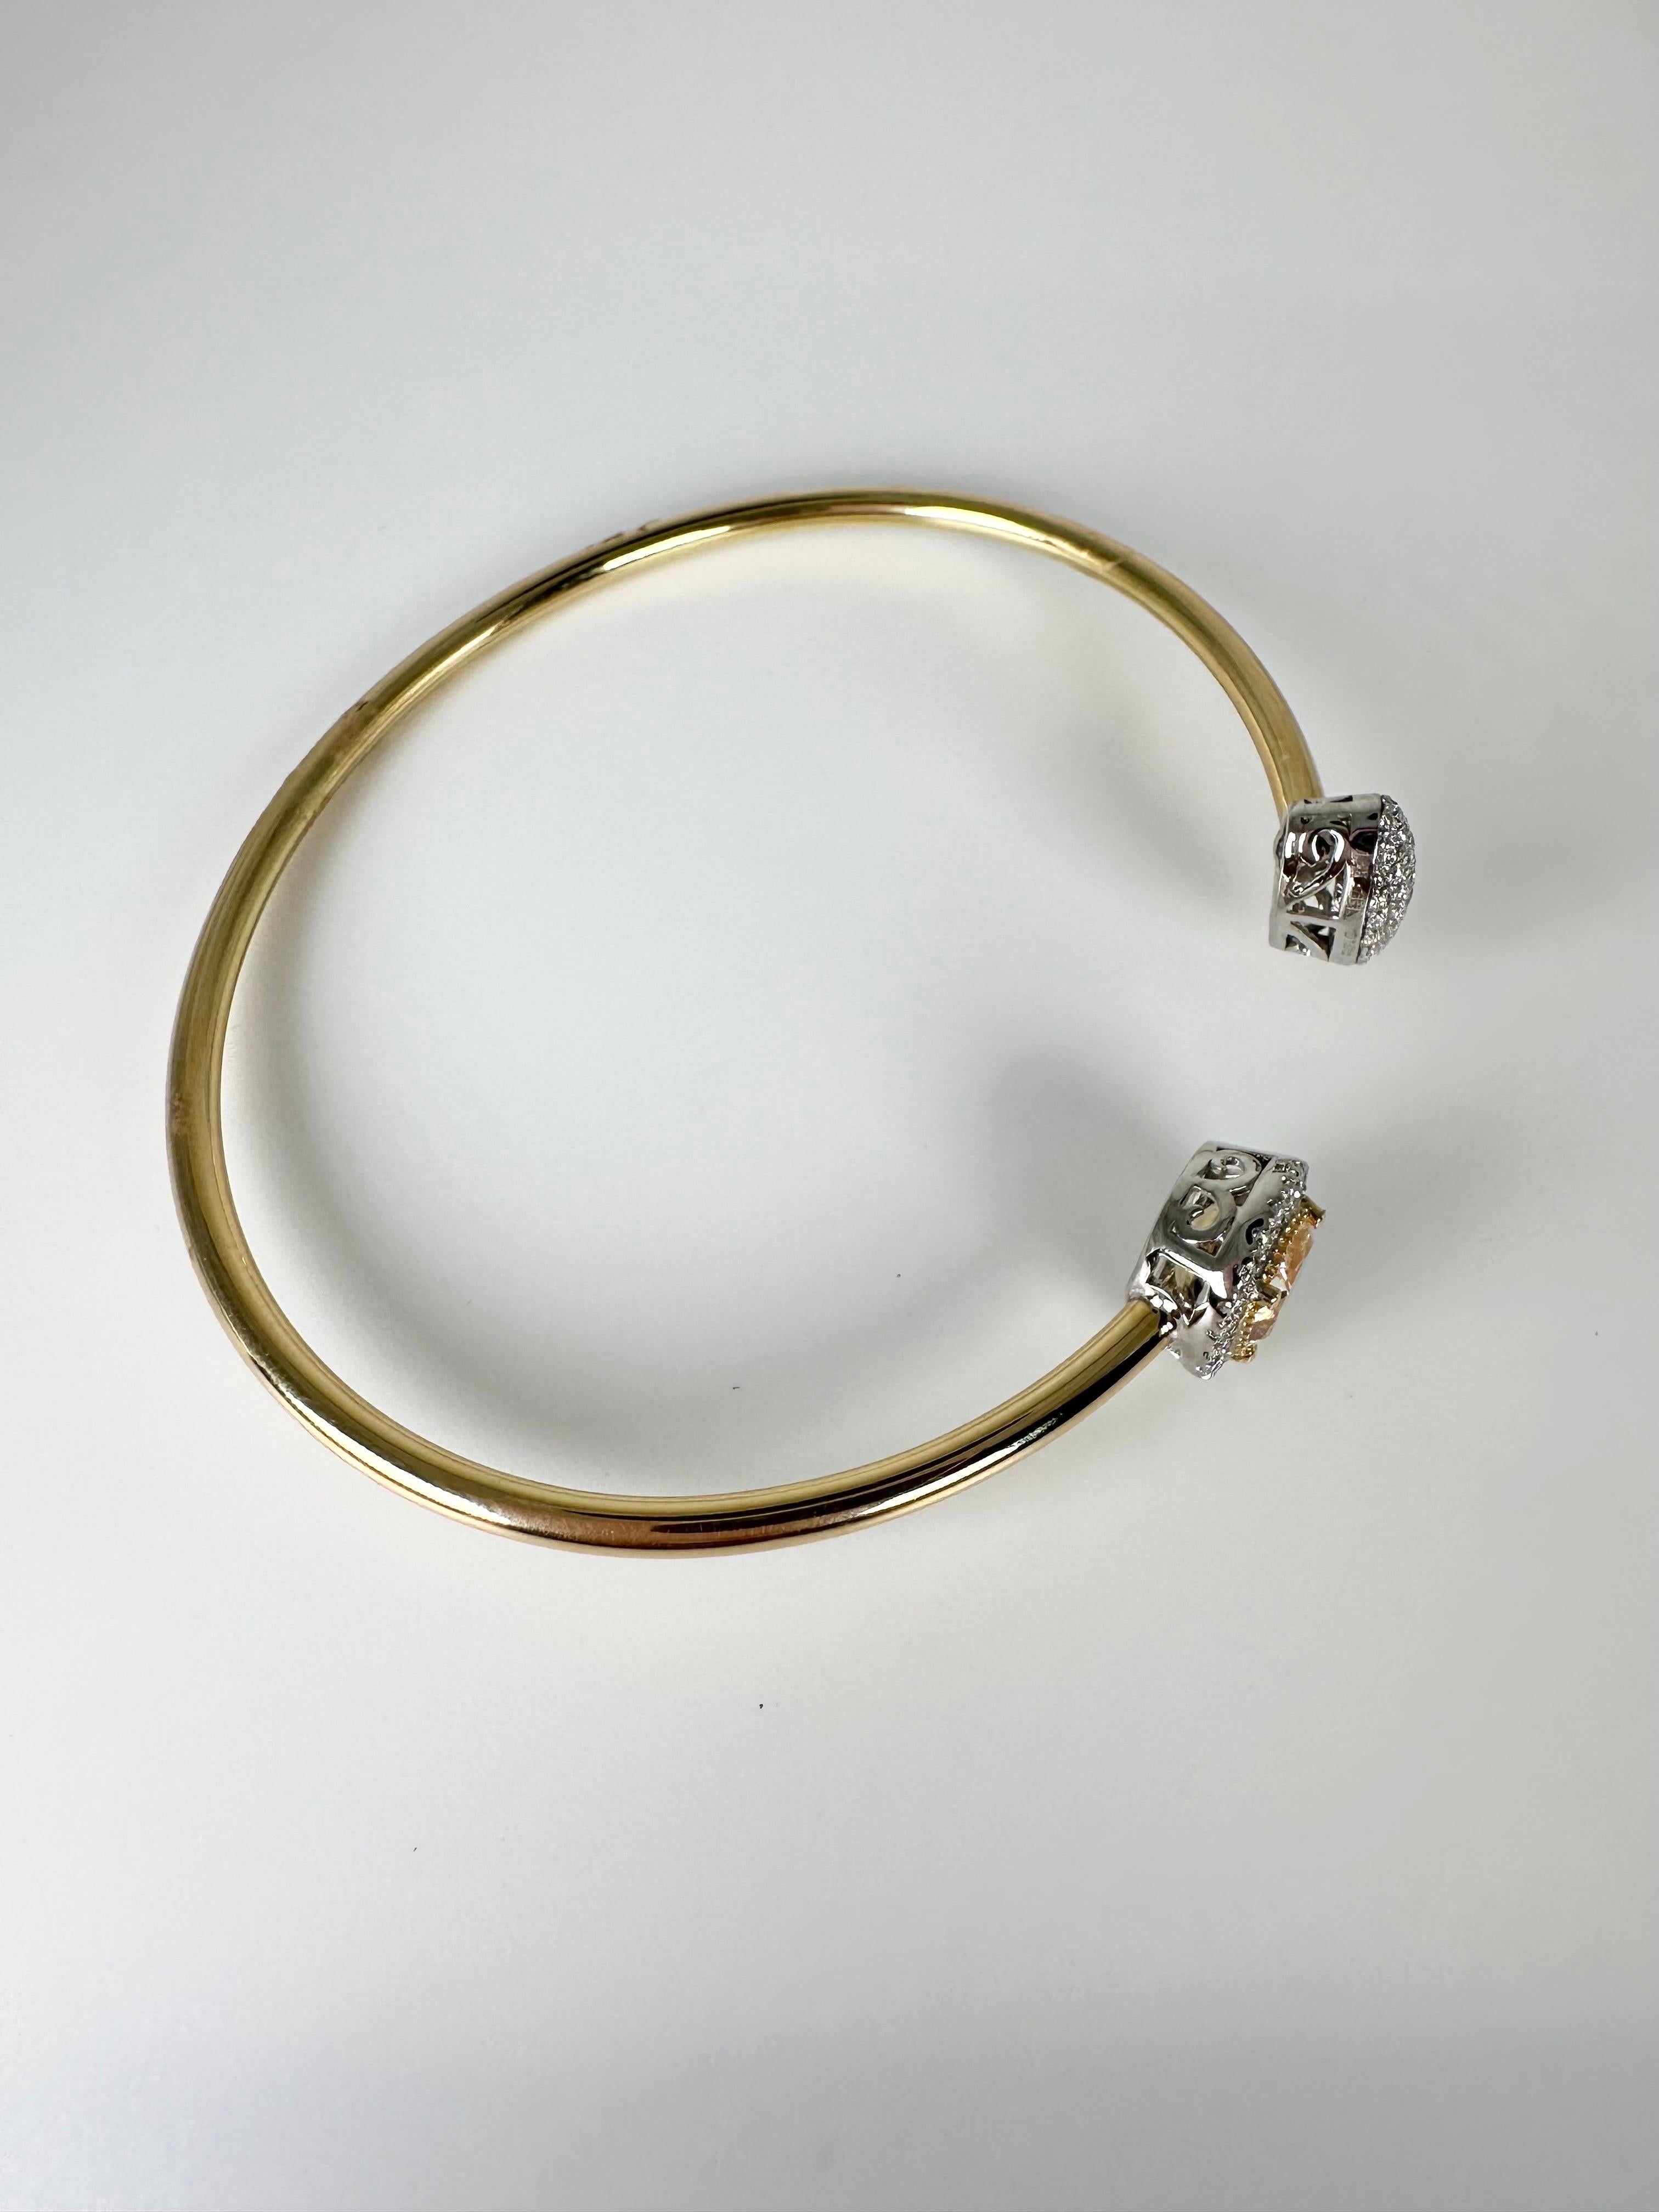 A very rare piece, flexible tube bangle bracelet with a large fancy yellow diamond, luxurious bracelet with modern style in 18KT yellow gold! WOW is the only word that comes to mind, not only is it comfortable but it is also very unique when on